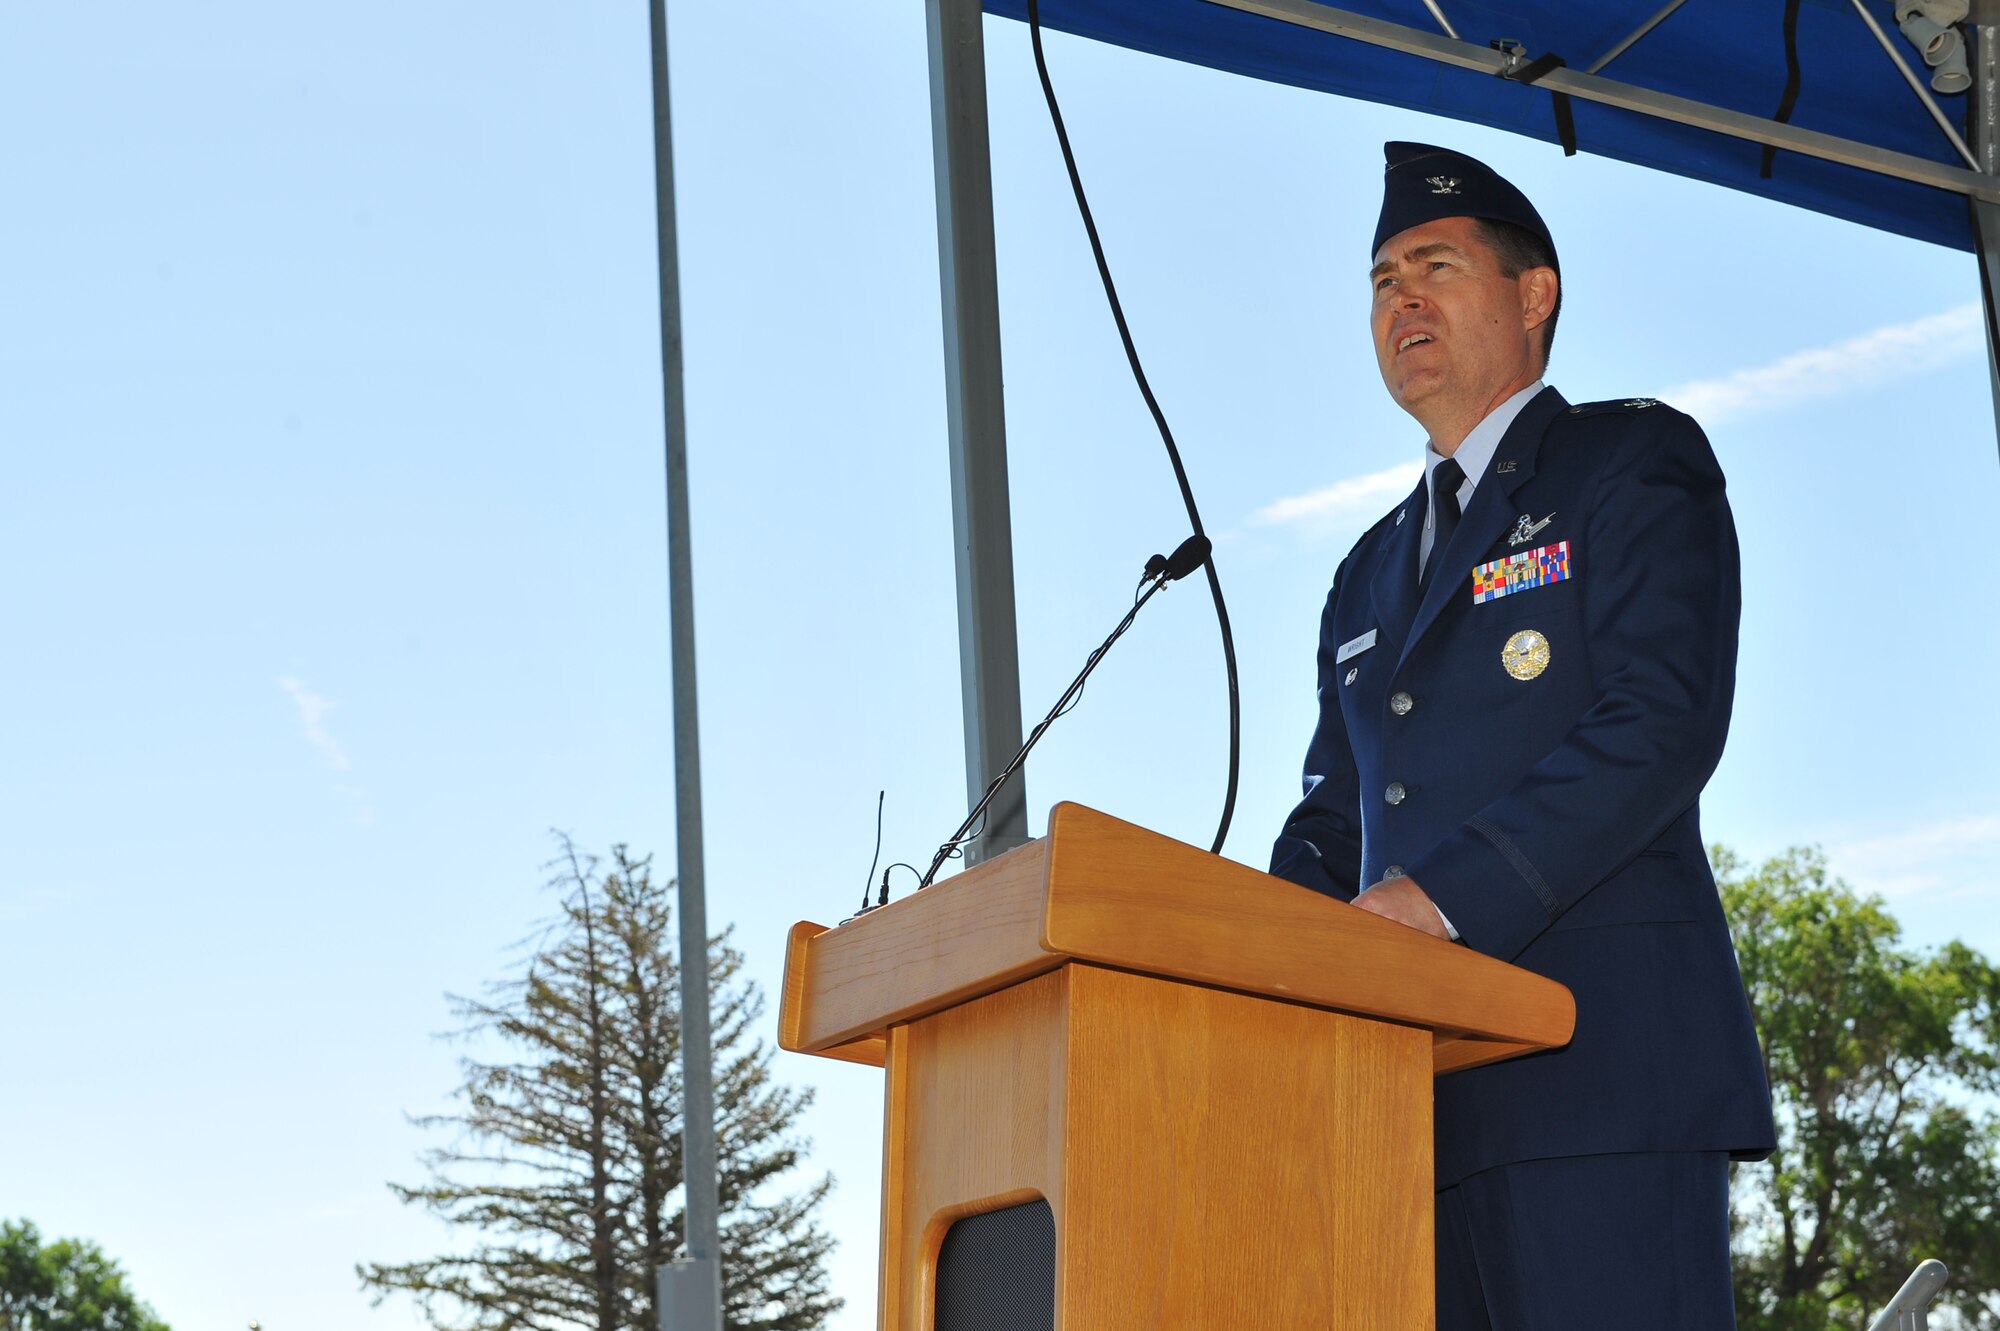 Col. Daniel D. Wright III, 460th Space Wing commander, addresses members of the 460th SW June 28, 2013, during the 460th SW change of command ceremony on Buckley Air Force Base, Colo. This is the third time Wright has been stationed on Buckley, having been stationed here in 1993 and 2005 as part of the 2nd Space Warning Squadron. (U.S. Air Force photo by Senior Airman Phillip Houk/Released)